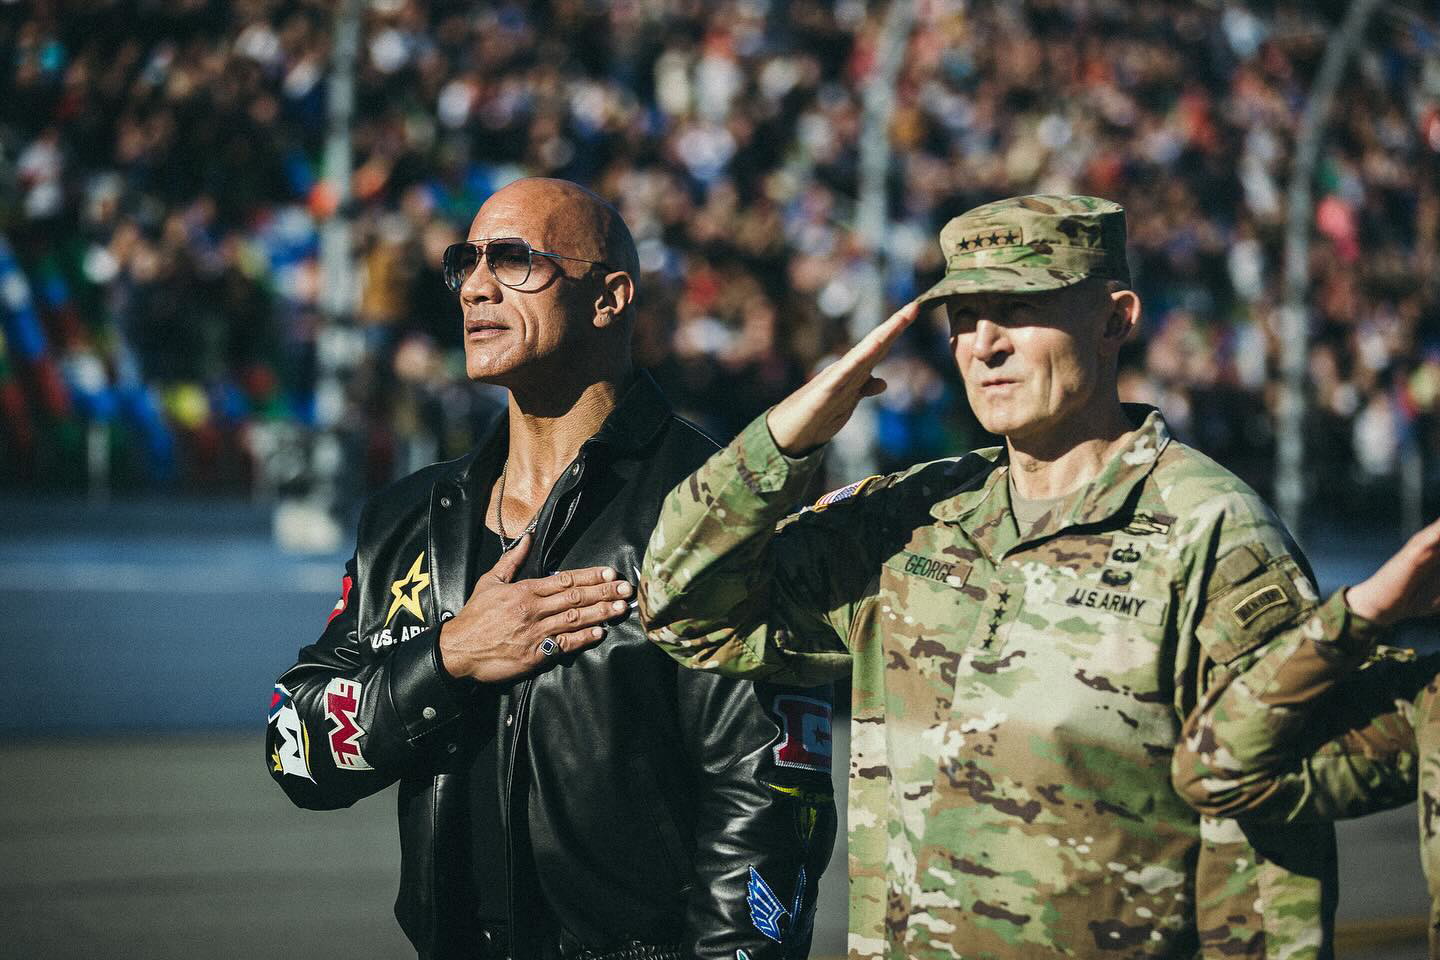 Dwayne Johnson with the US Army | via Instagram @therock